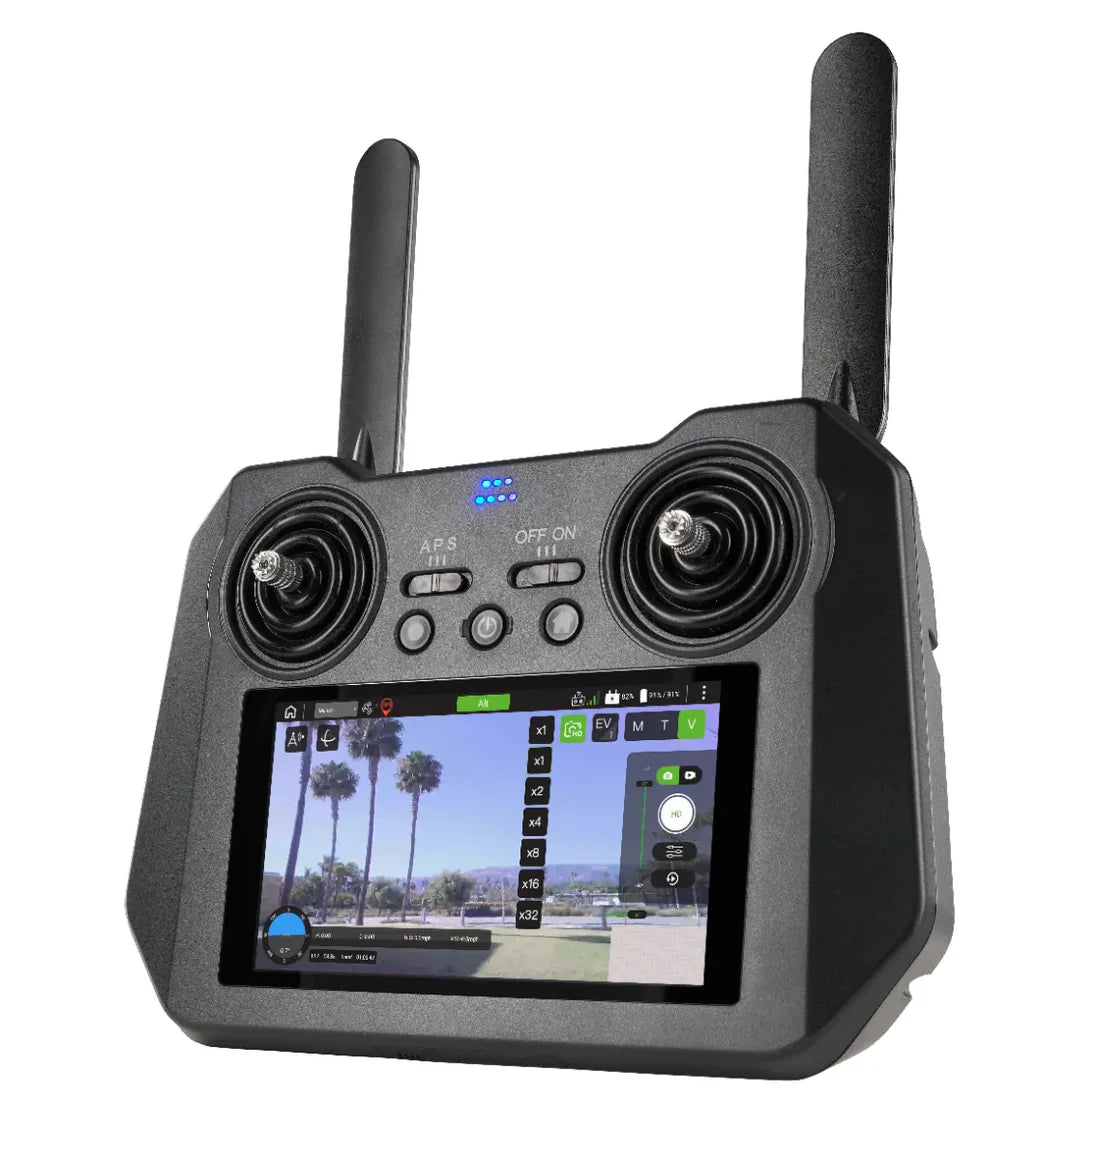 Teledyne FLIR SIRAS Drone With Thermal and Visible Camera Payload